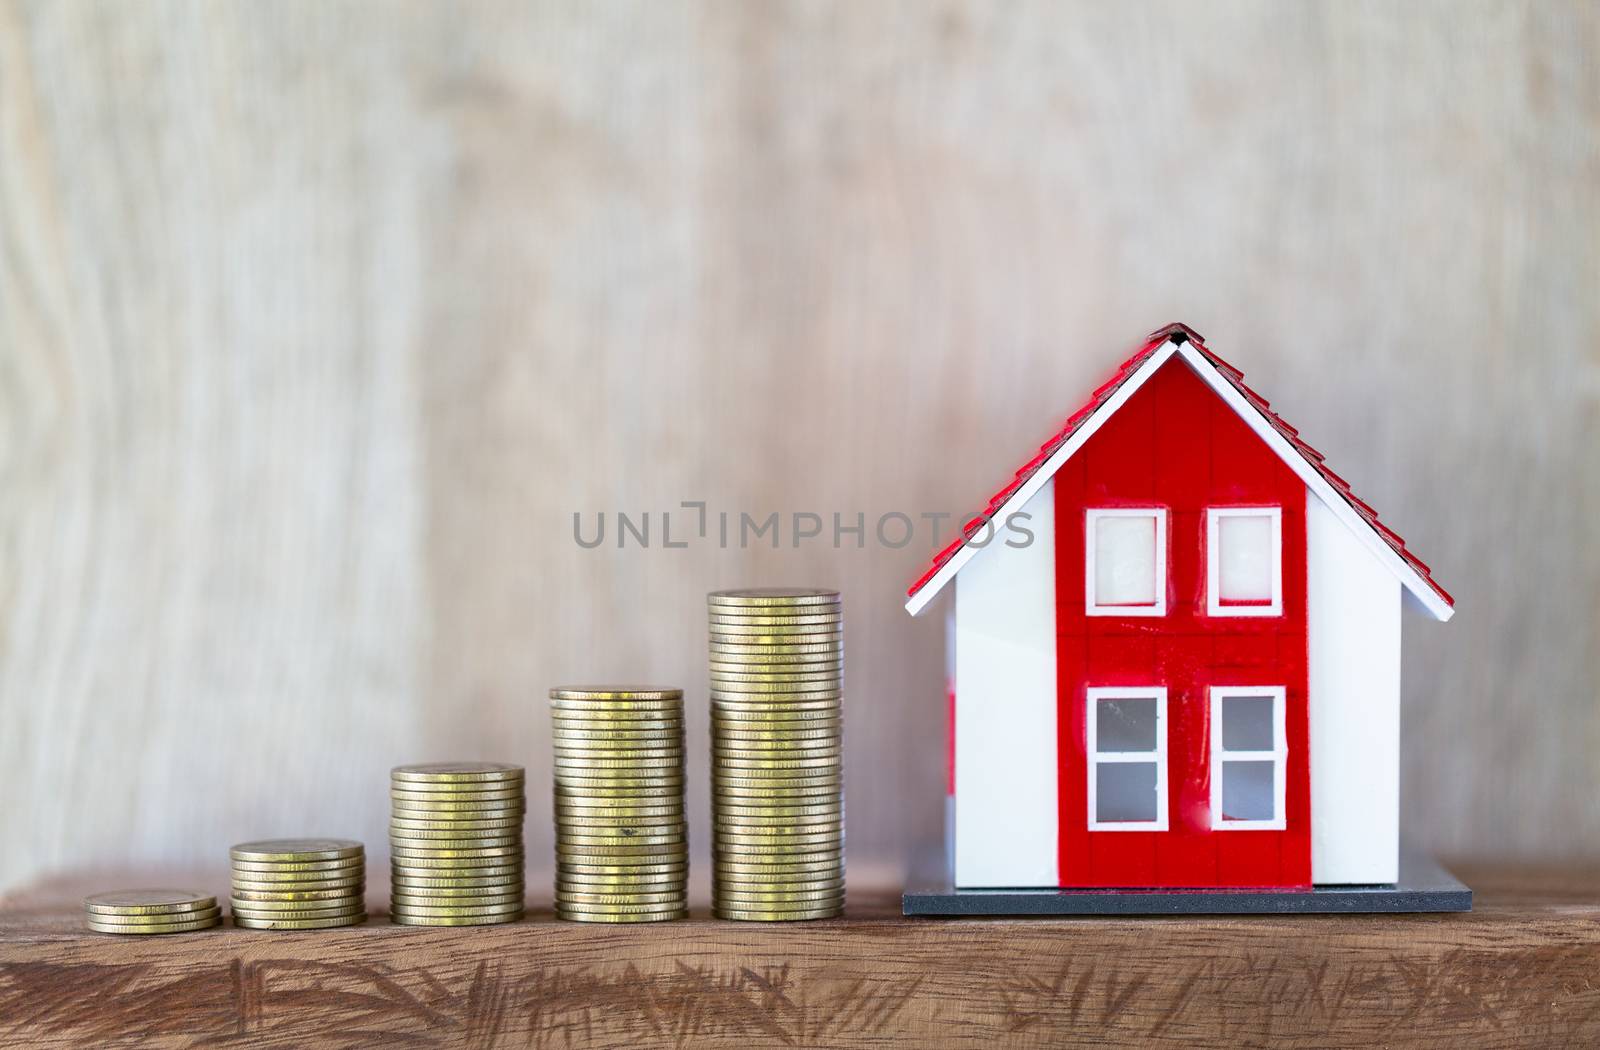 Red roof house model. Coins that are stacked from low to high. Financial and banking concepts Preparing for home purchase and real estate economic growth. Home mortgage finance.